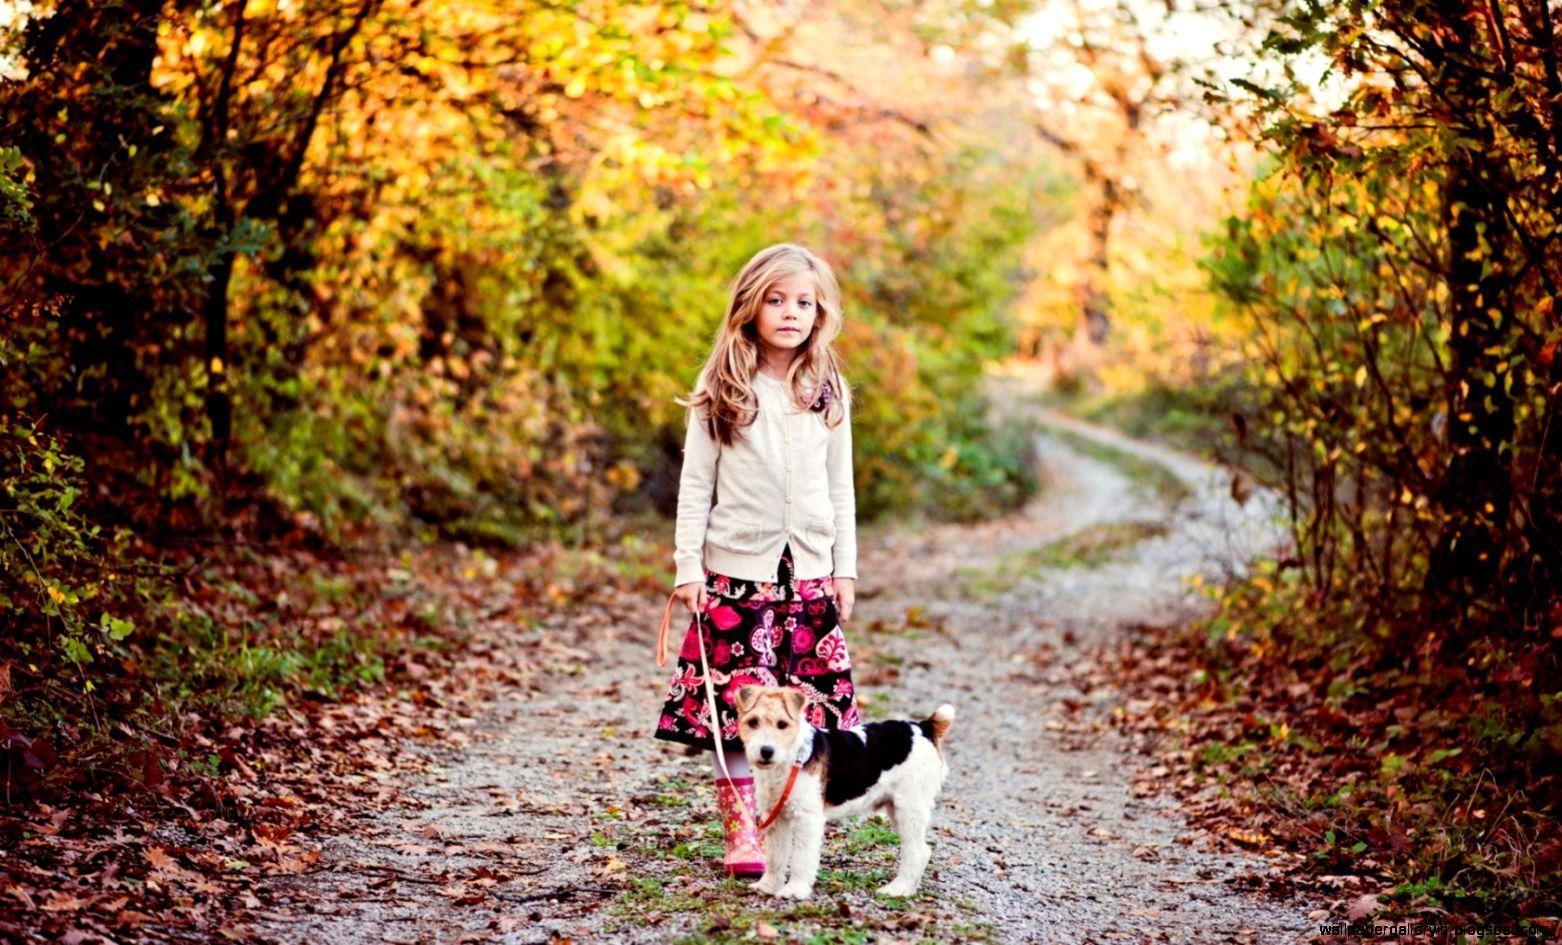 Child Girl Autumn Photography Wallpaper Gallery. PI